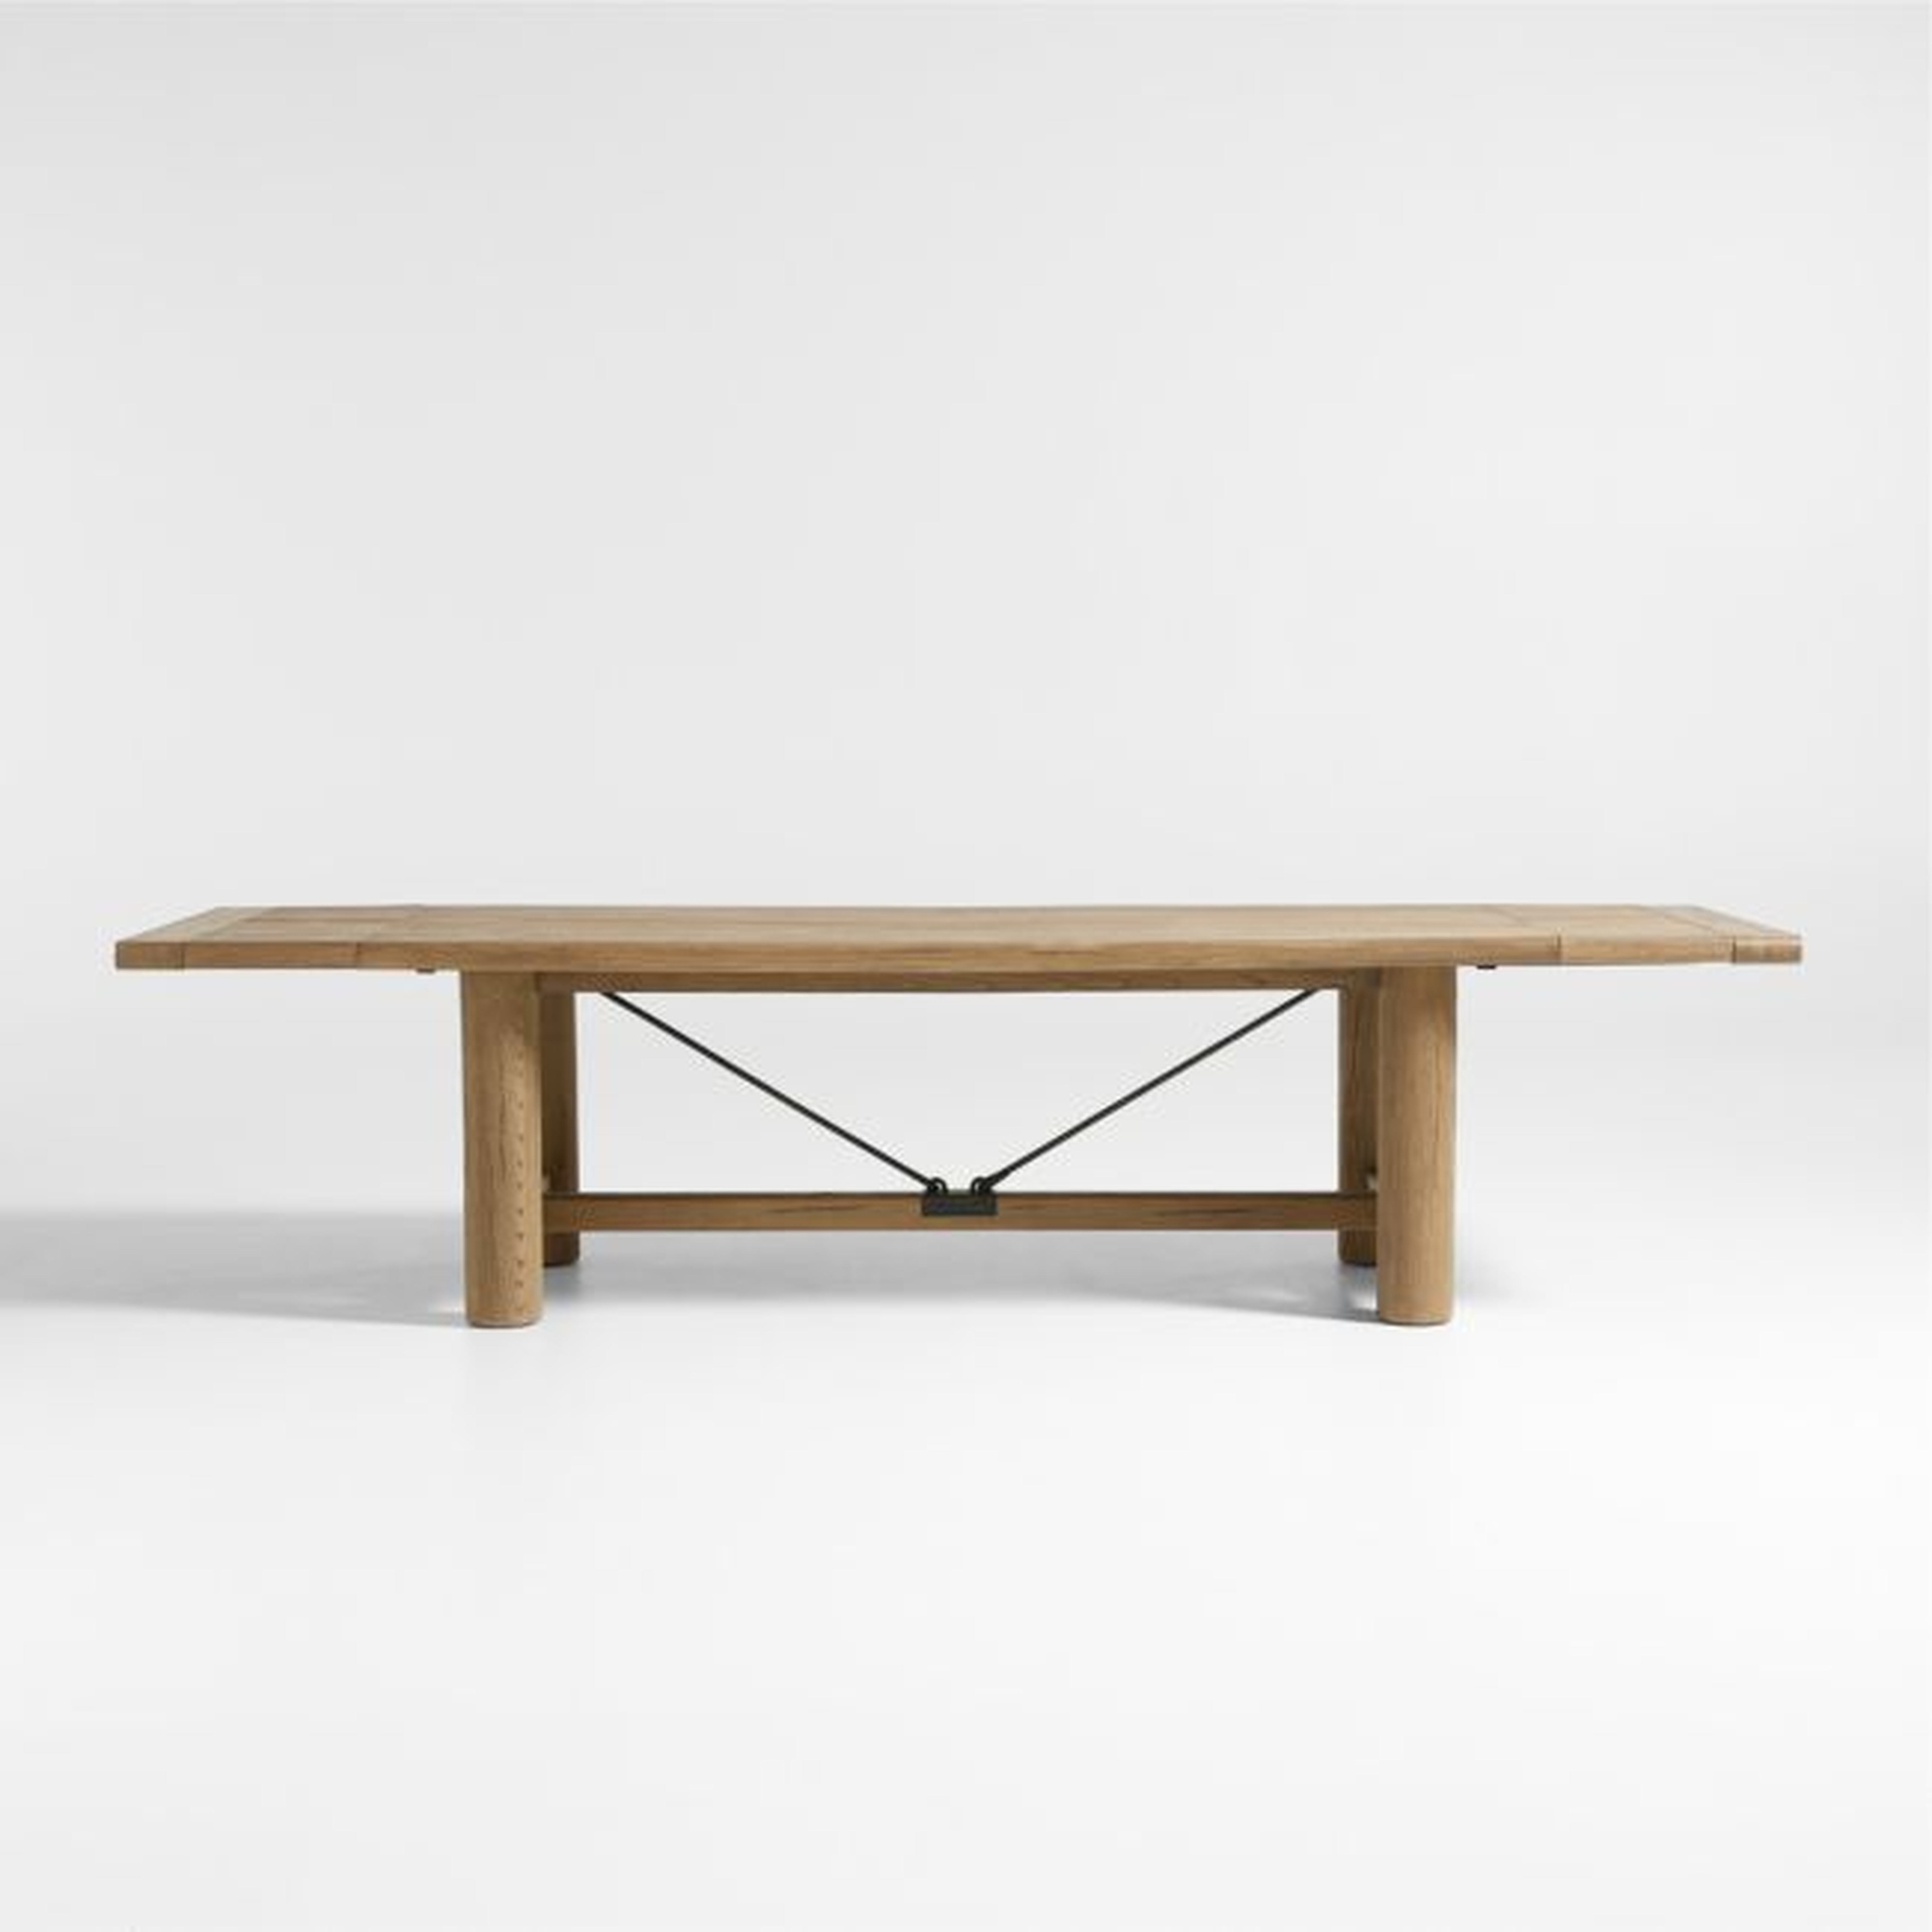 Breckenridge 100"-126" Weathered Rustic Oak Wood Extendable Dining Table - Crate and Barrel